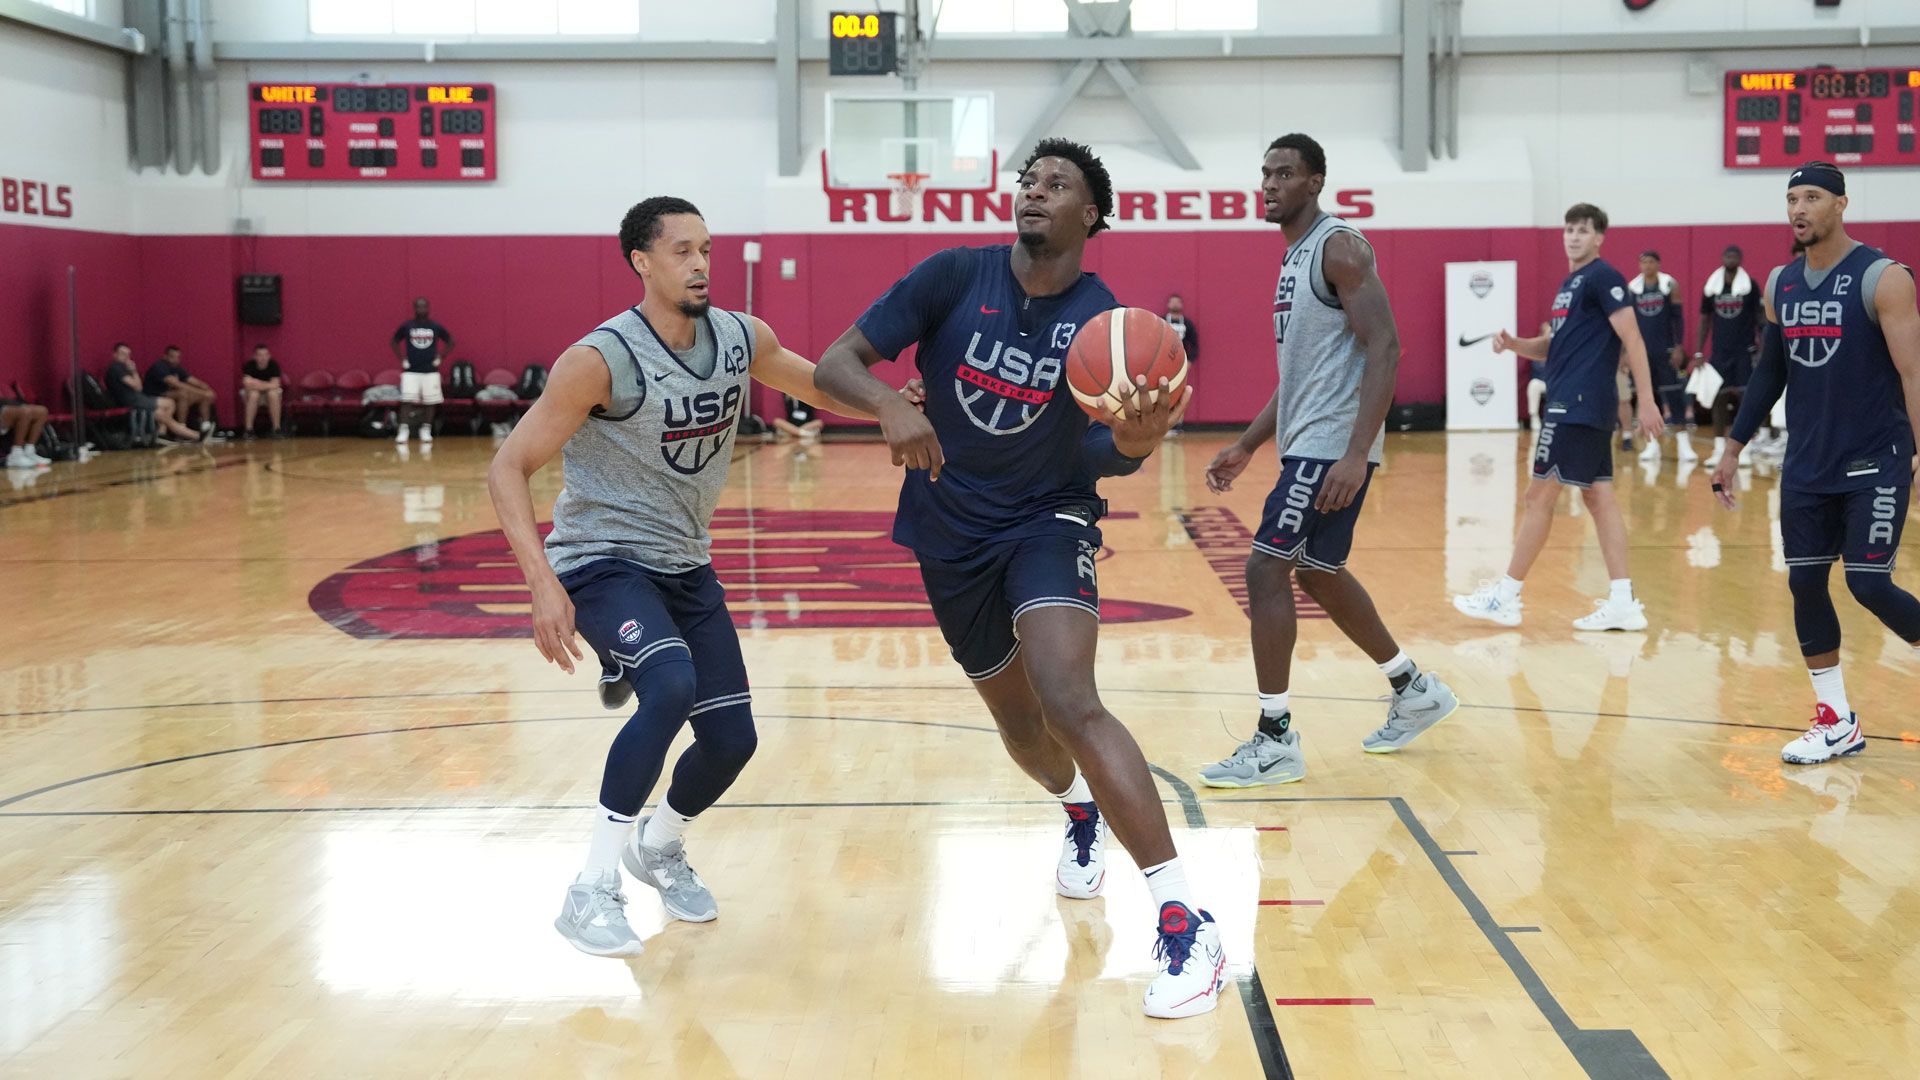 MikeCheck: 5 Takeaways from USA training camp as Grizzlies star Jackson thrives in FIBA prep